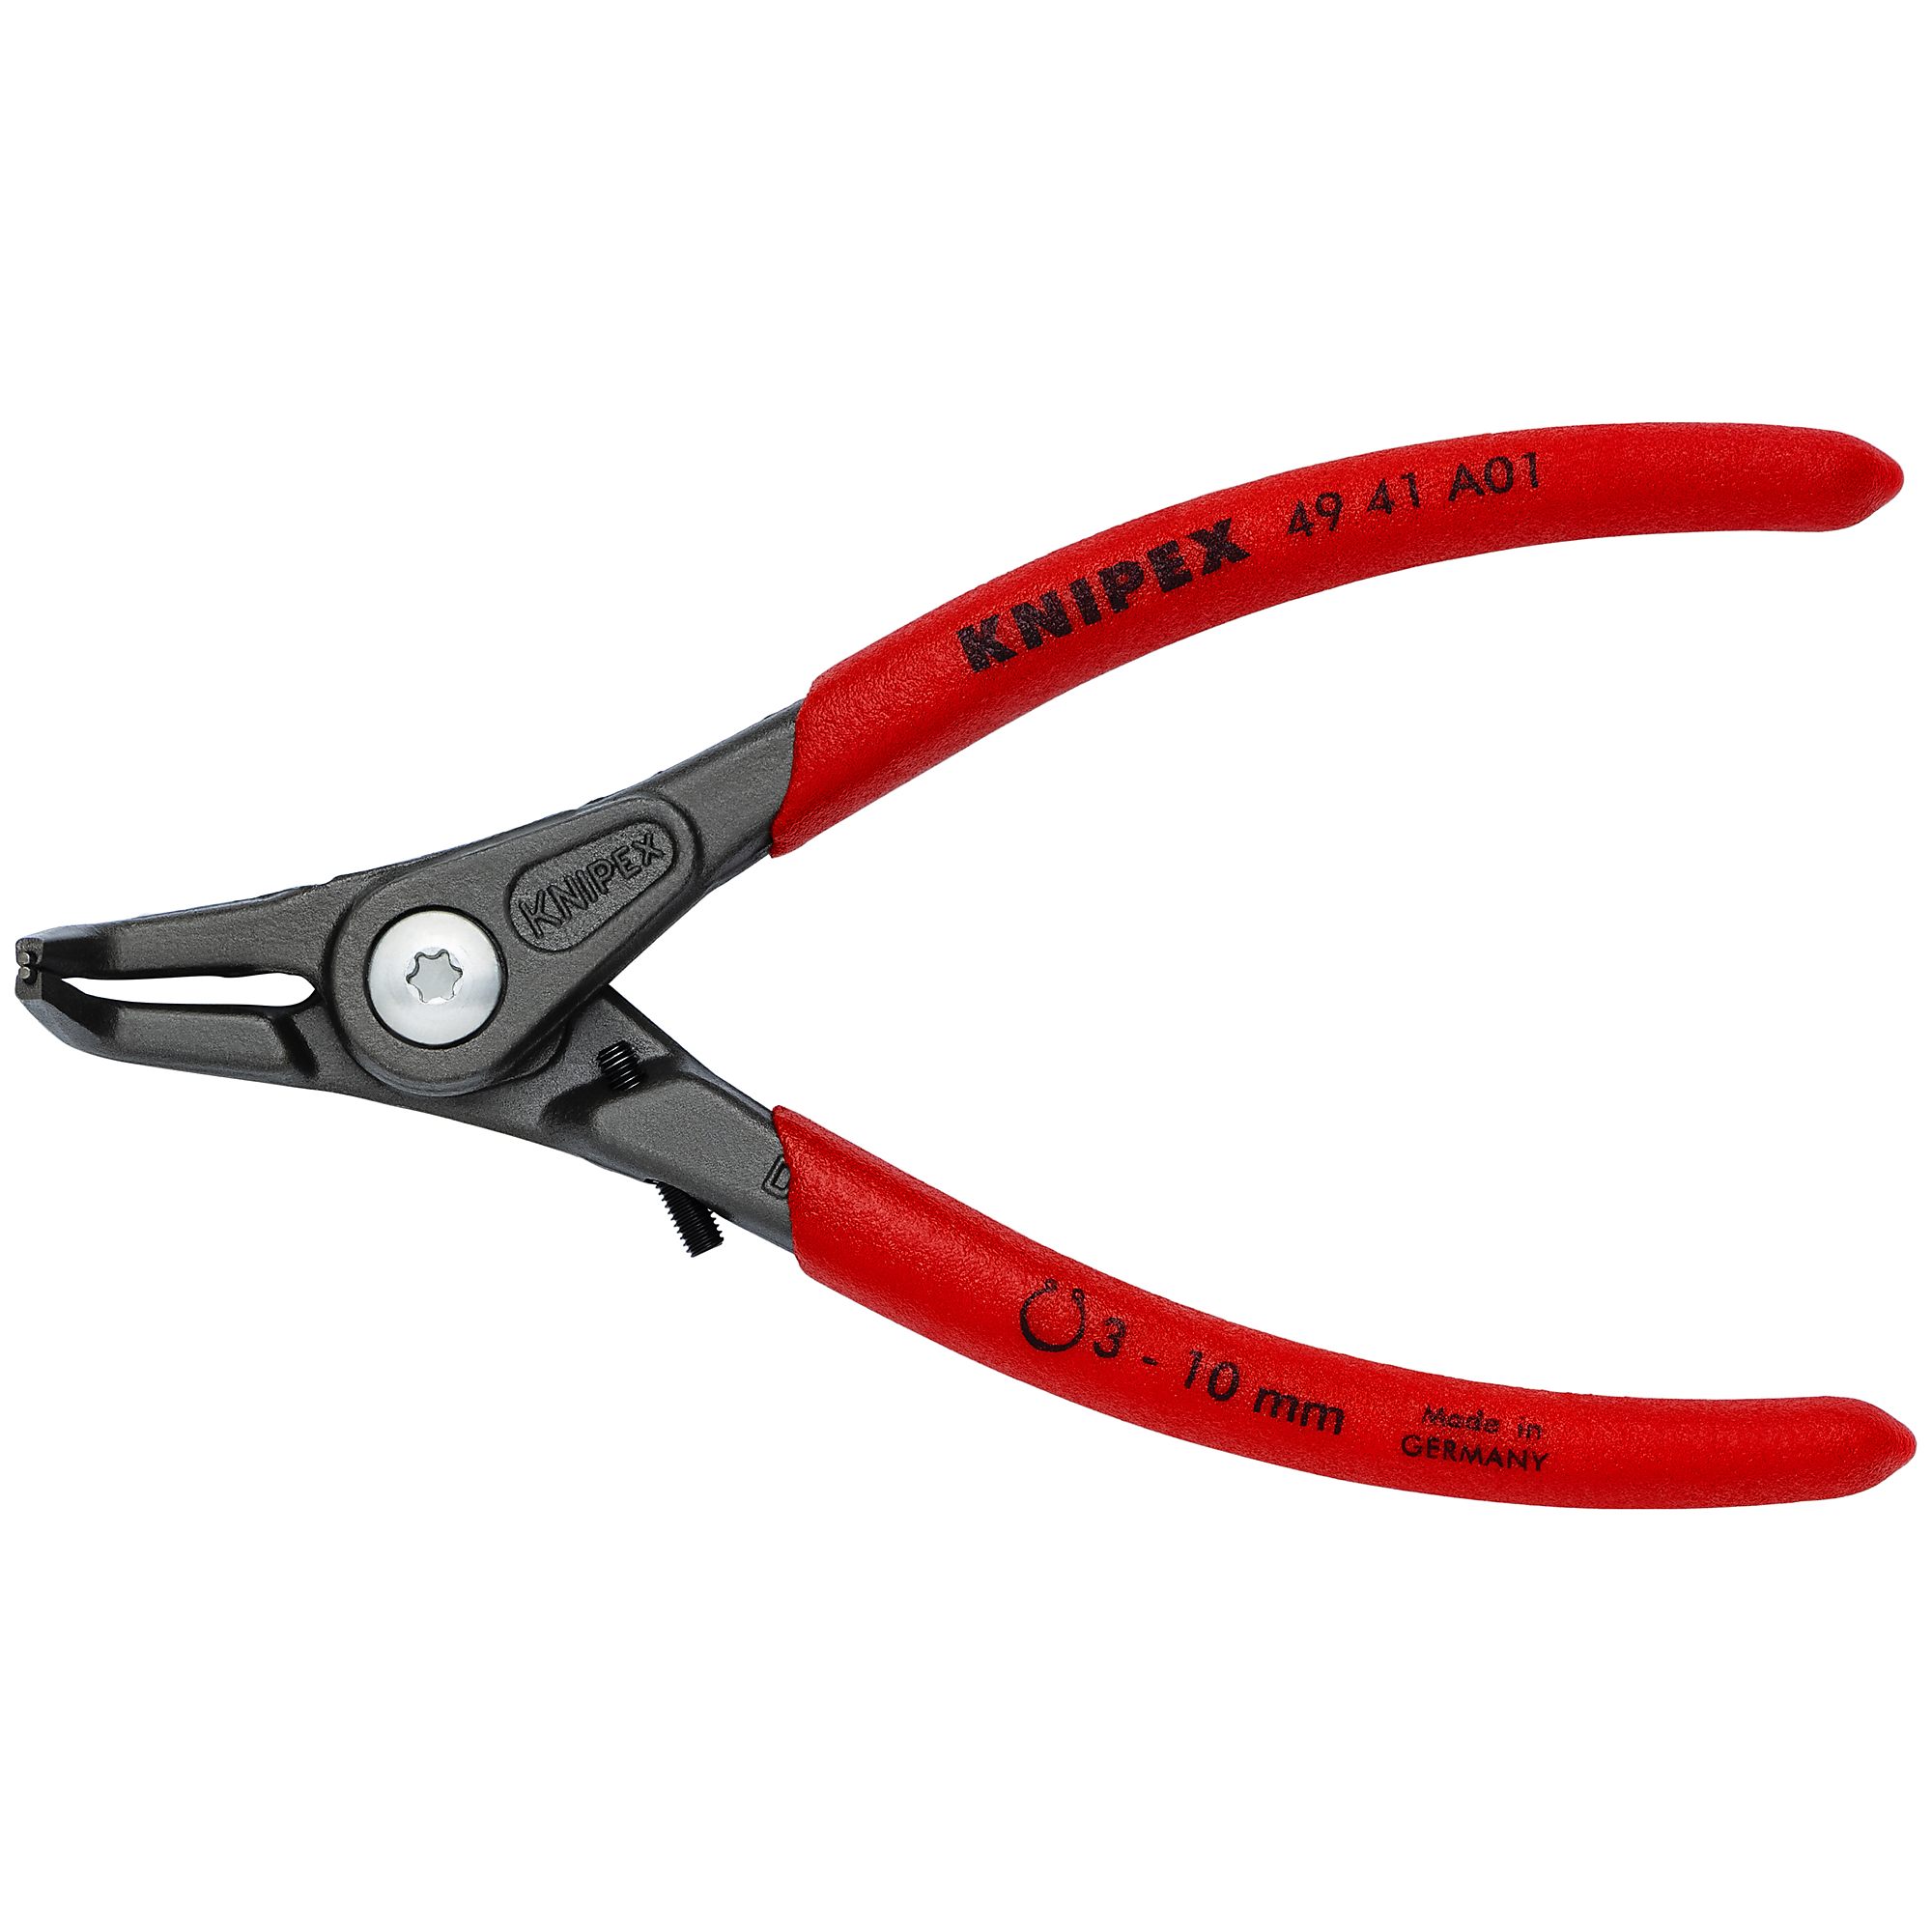 KNIPEX, Ext 90Â°Prec.Snap Ring Plrs-Limiter,1/32 tip,5.25Inch, Pieces (qty.) 1 Material Steel, Model 49 41 A01